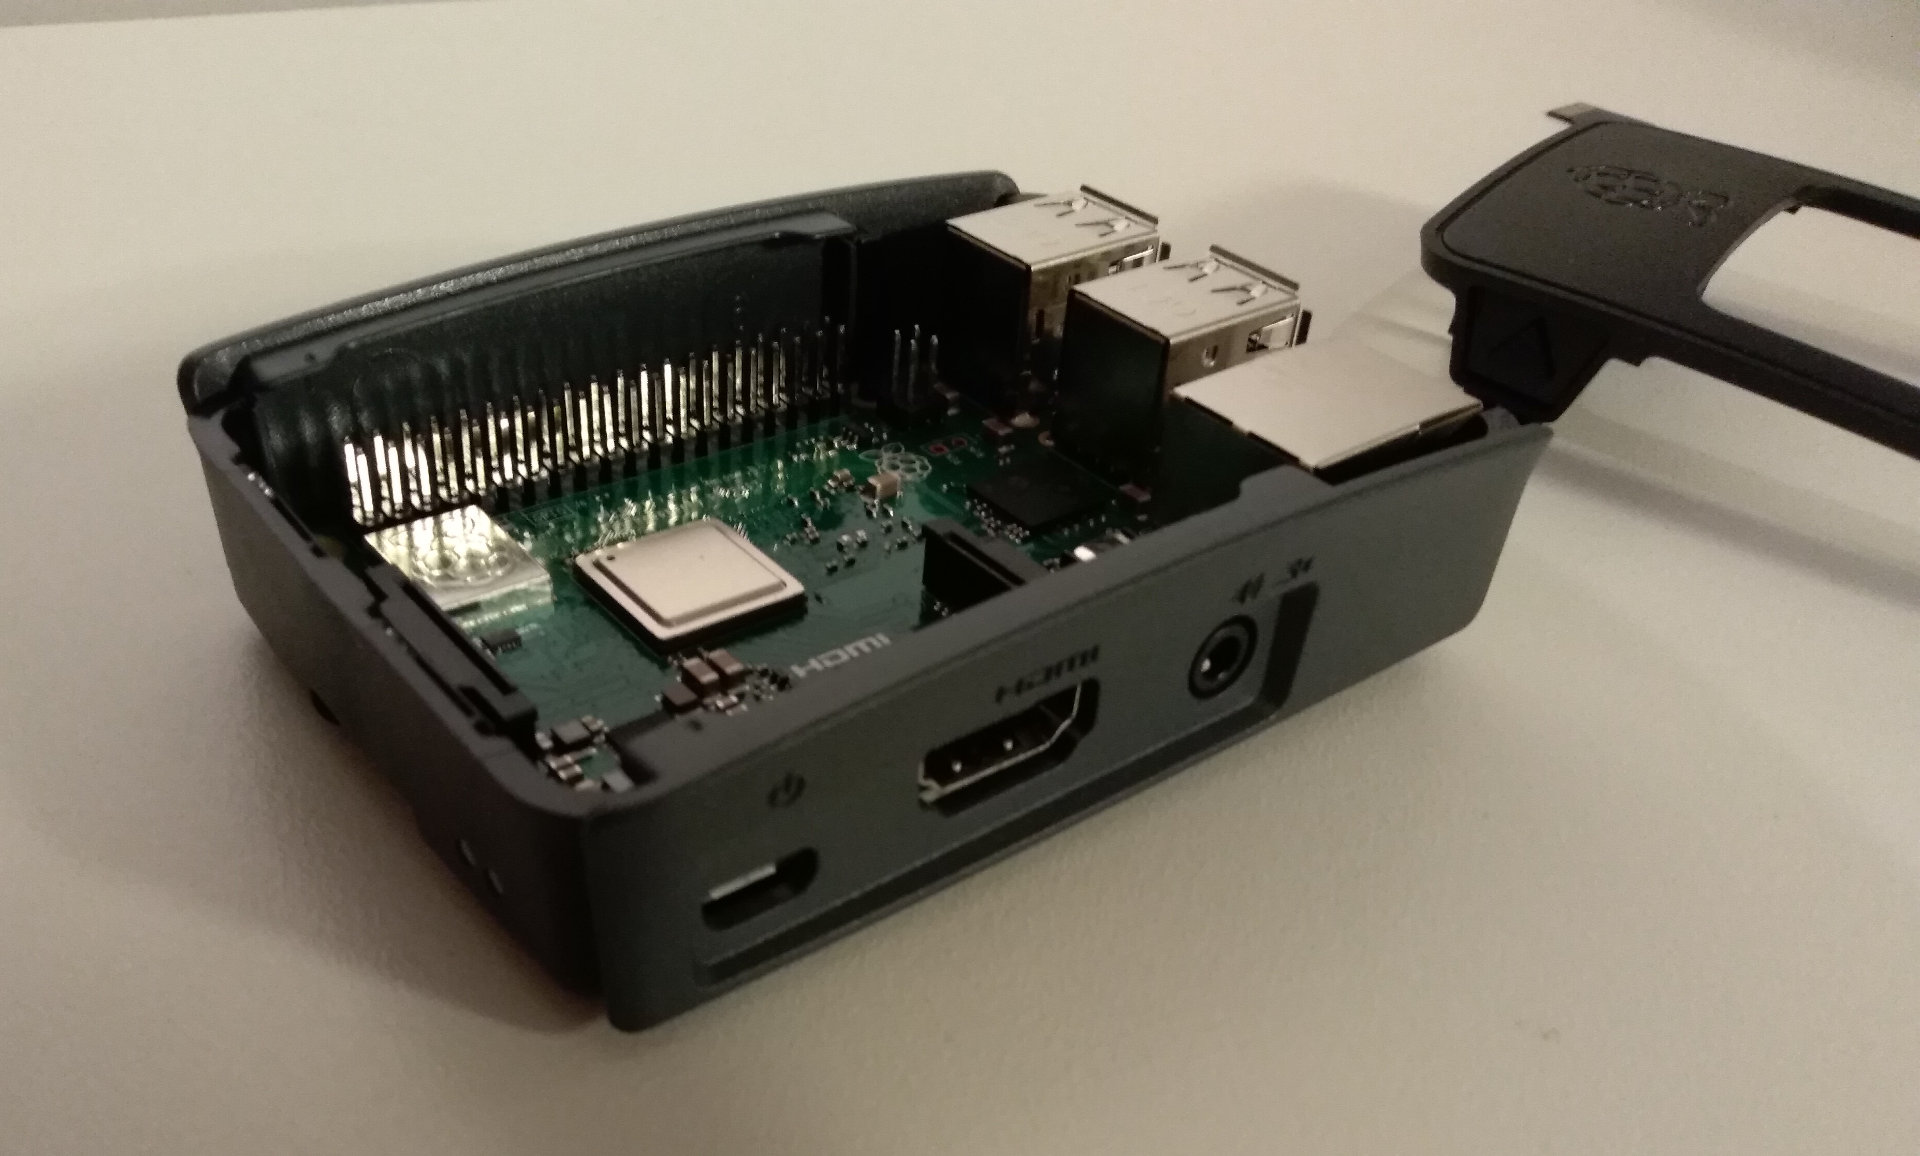 Partially assembled case with the Pi inside